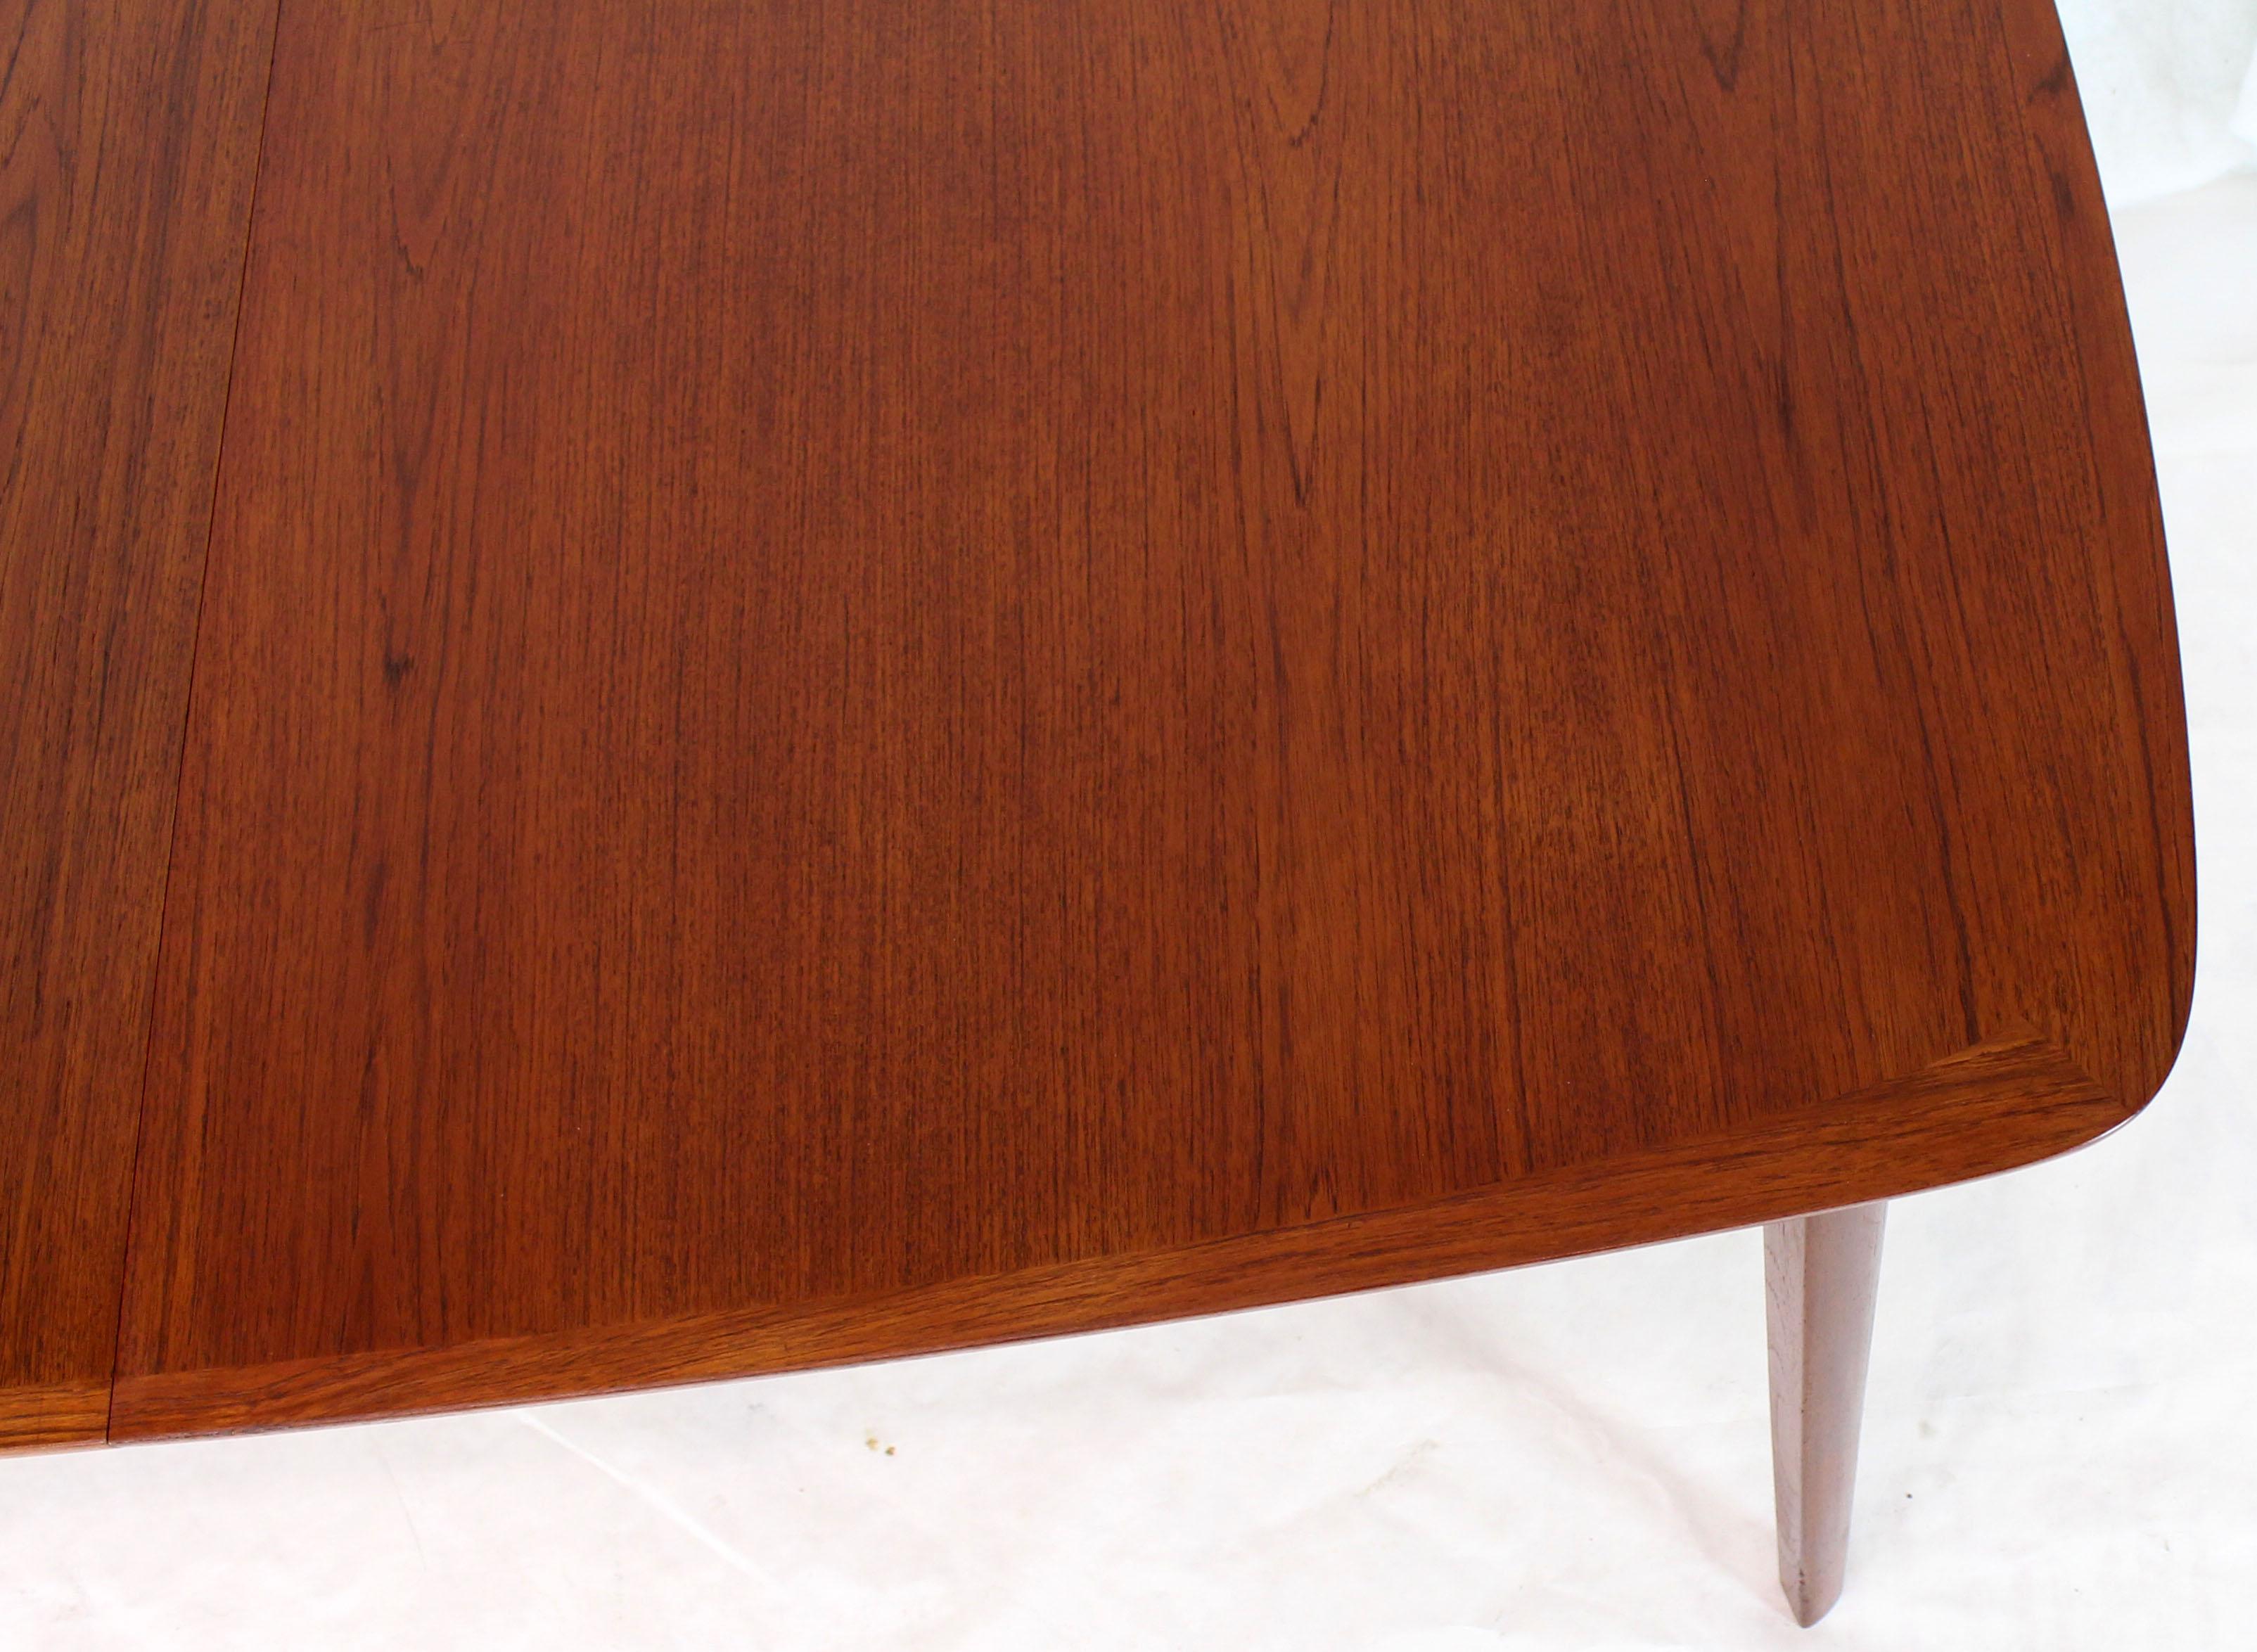 Danish Teak Mid-Century Modern Dining Banquet Table Self Storing Folding Leafs For Sale 3